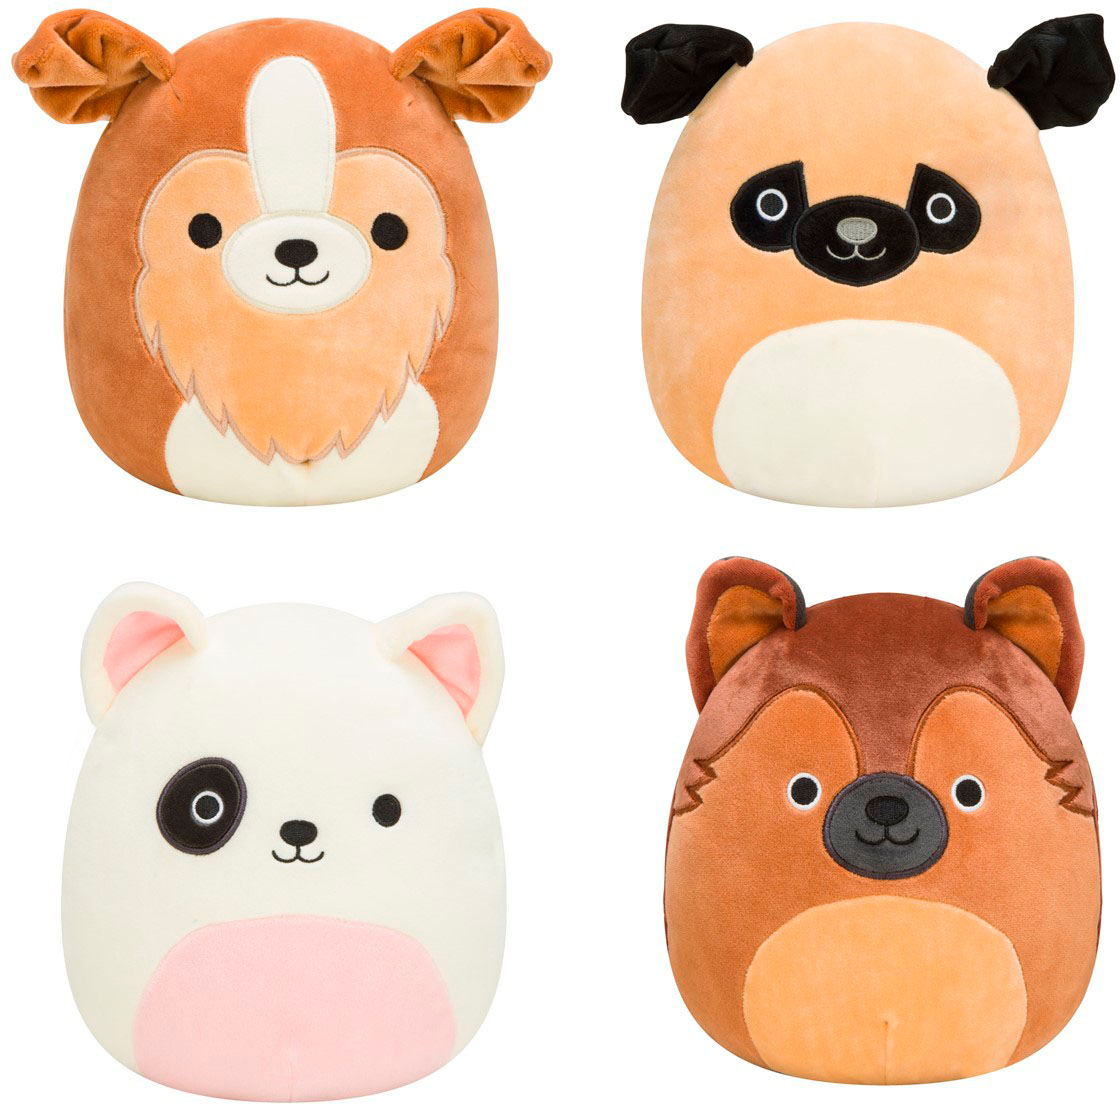 Jazwares Squishmallows 8 Plush Assortment Dogs Styles May Vary  SQ20-8DAST-1 - Best Buy